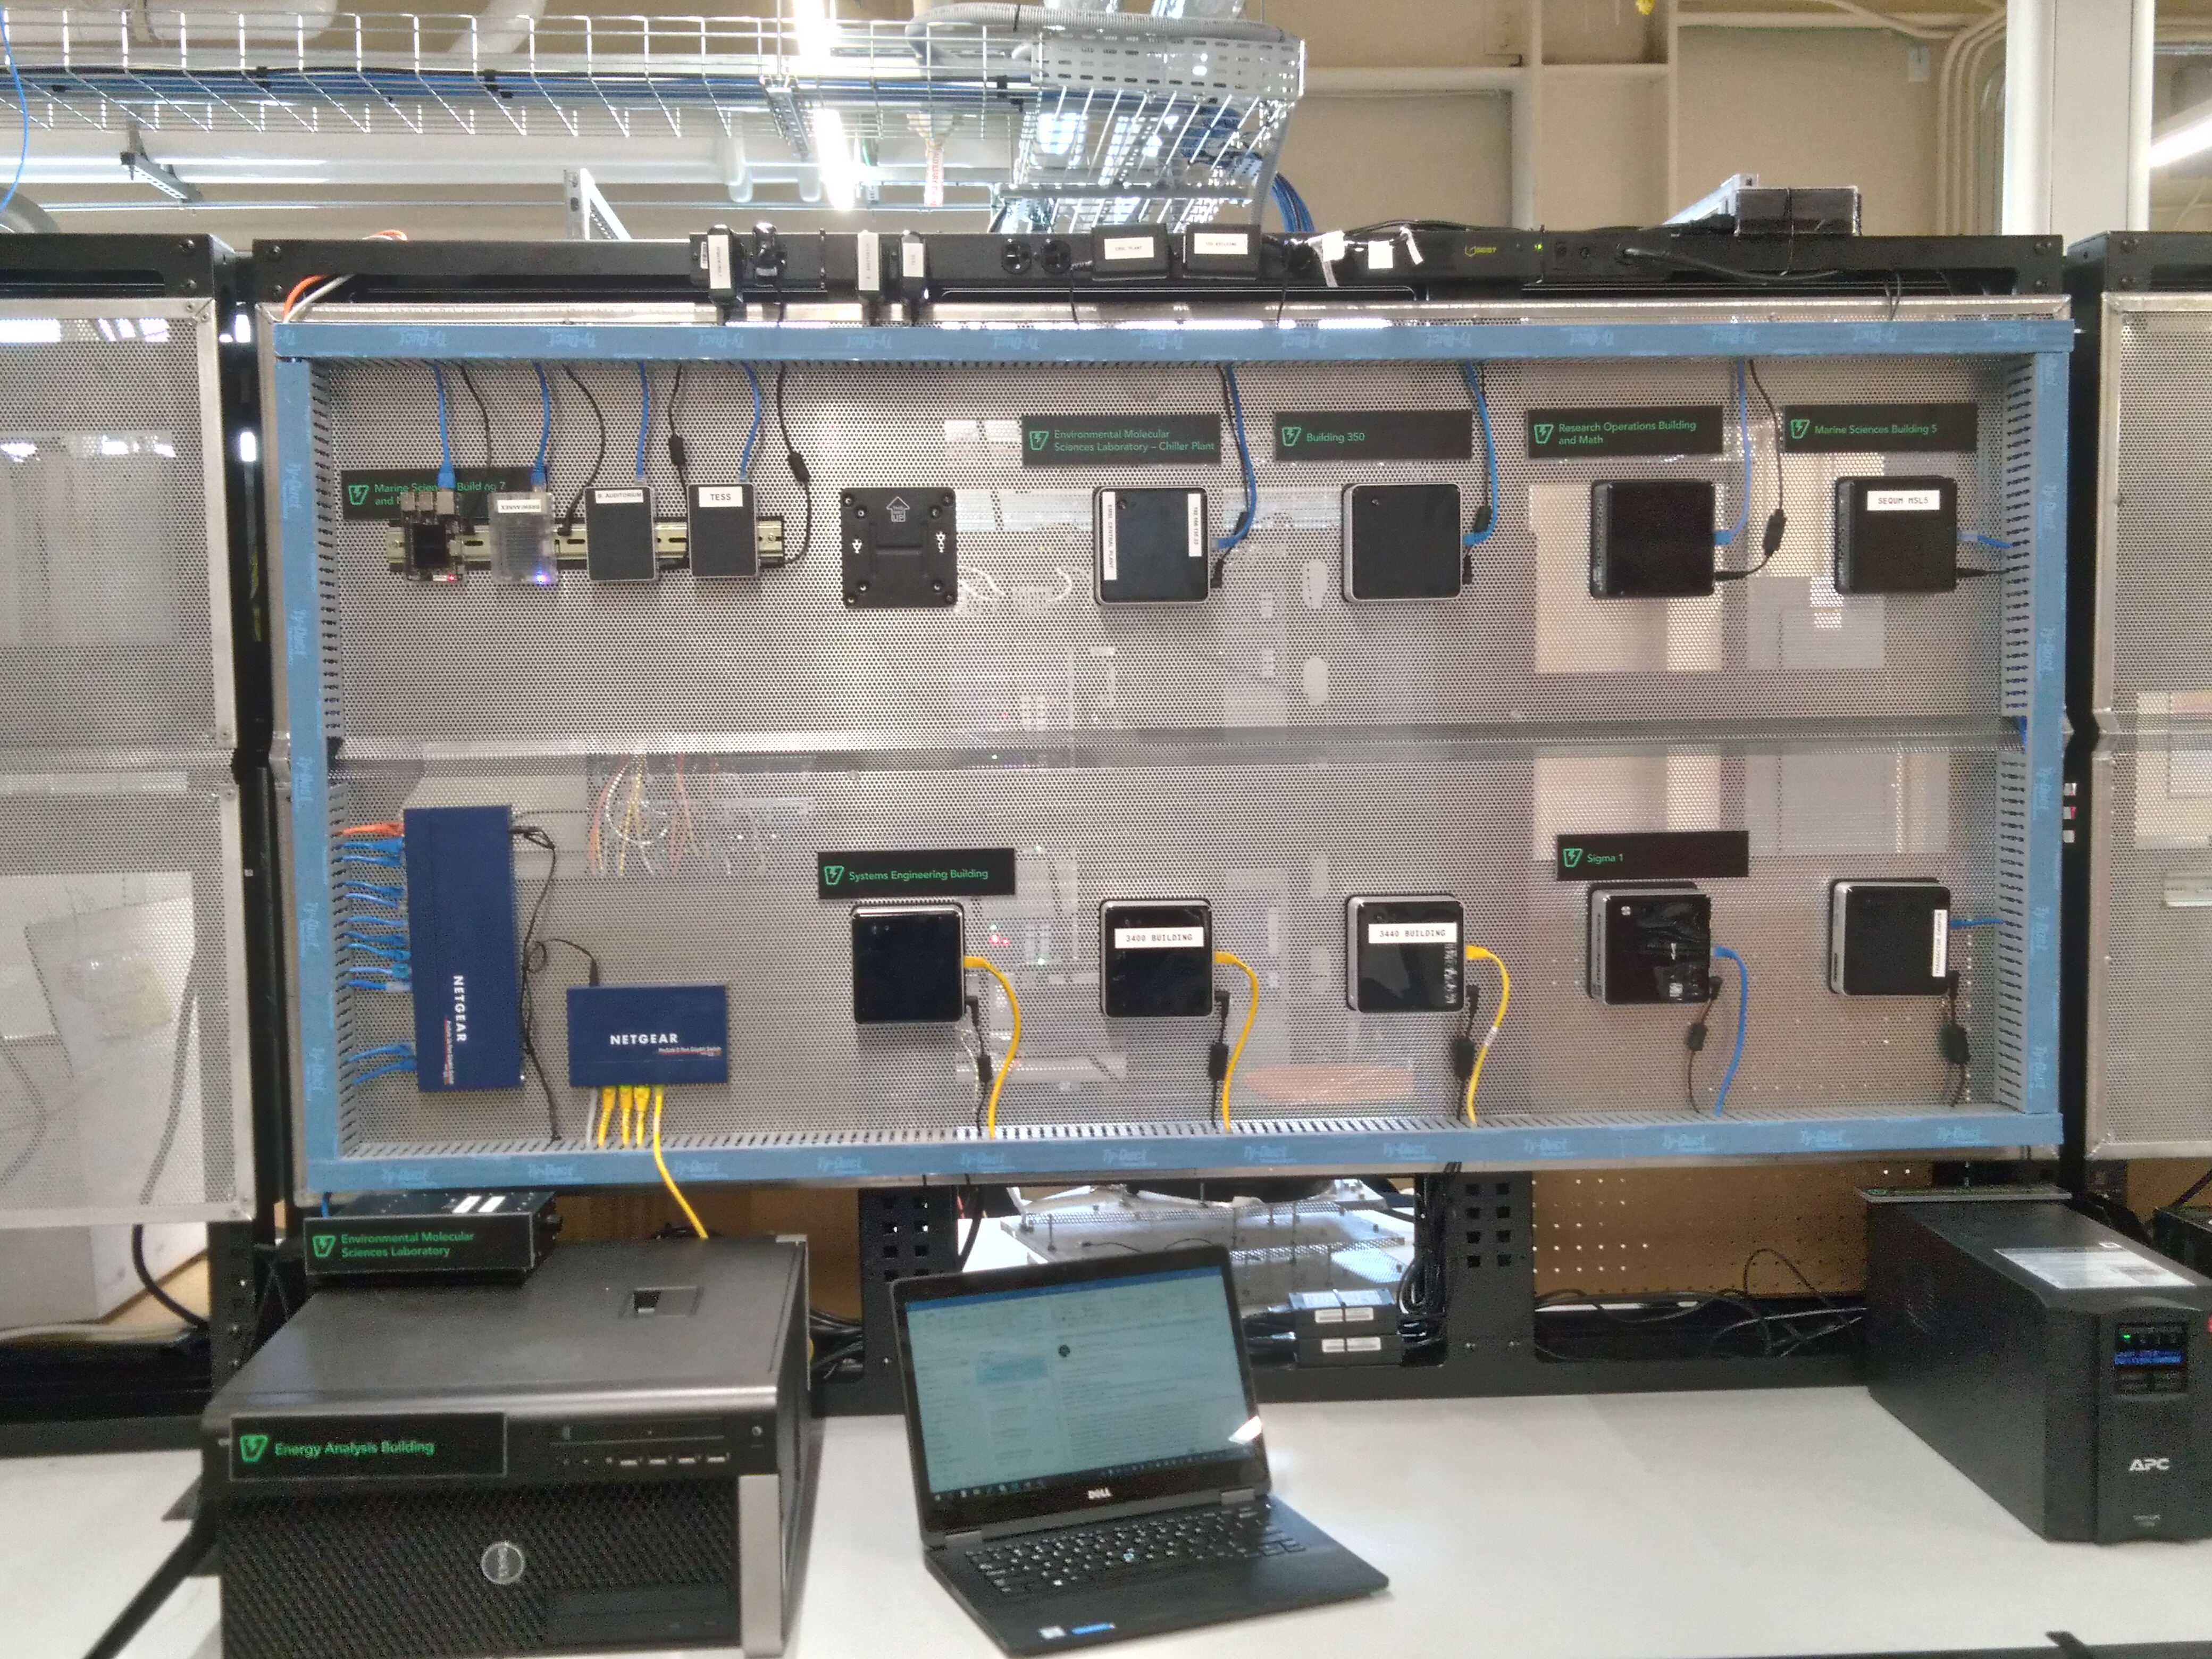 Control nodes in the Power Electronics Laboratory enable testing of transactive energy methods in buildings on the PNNL campus.